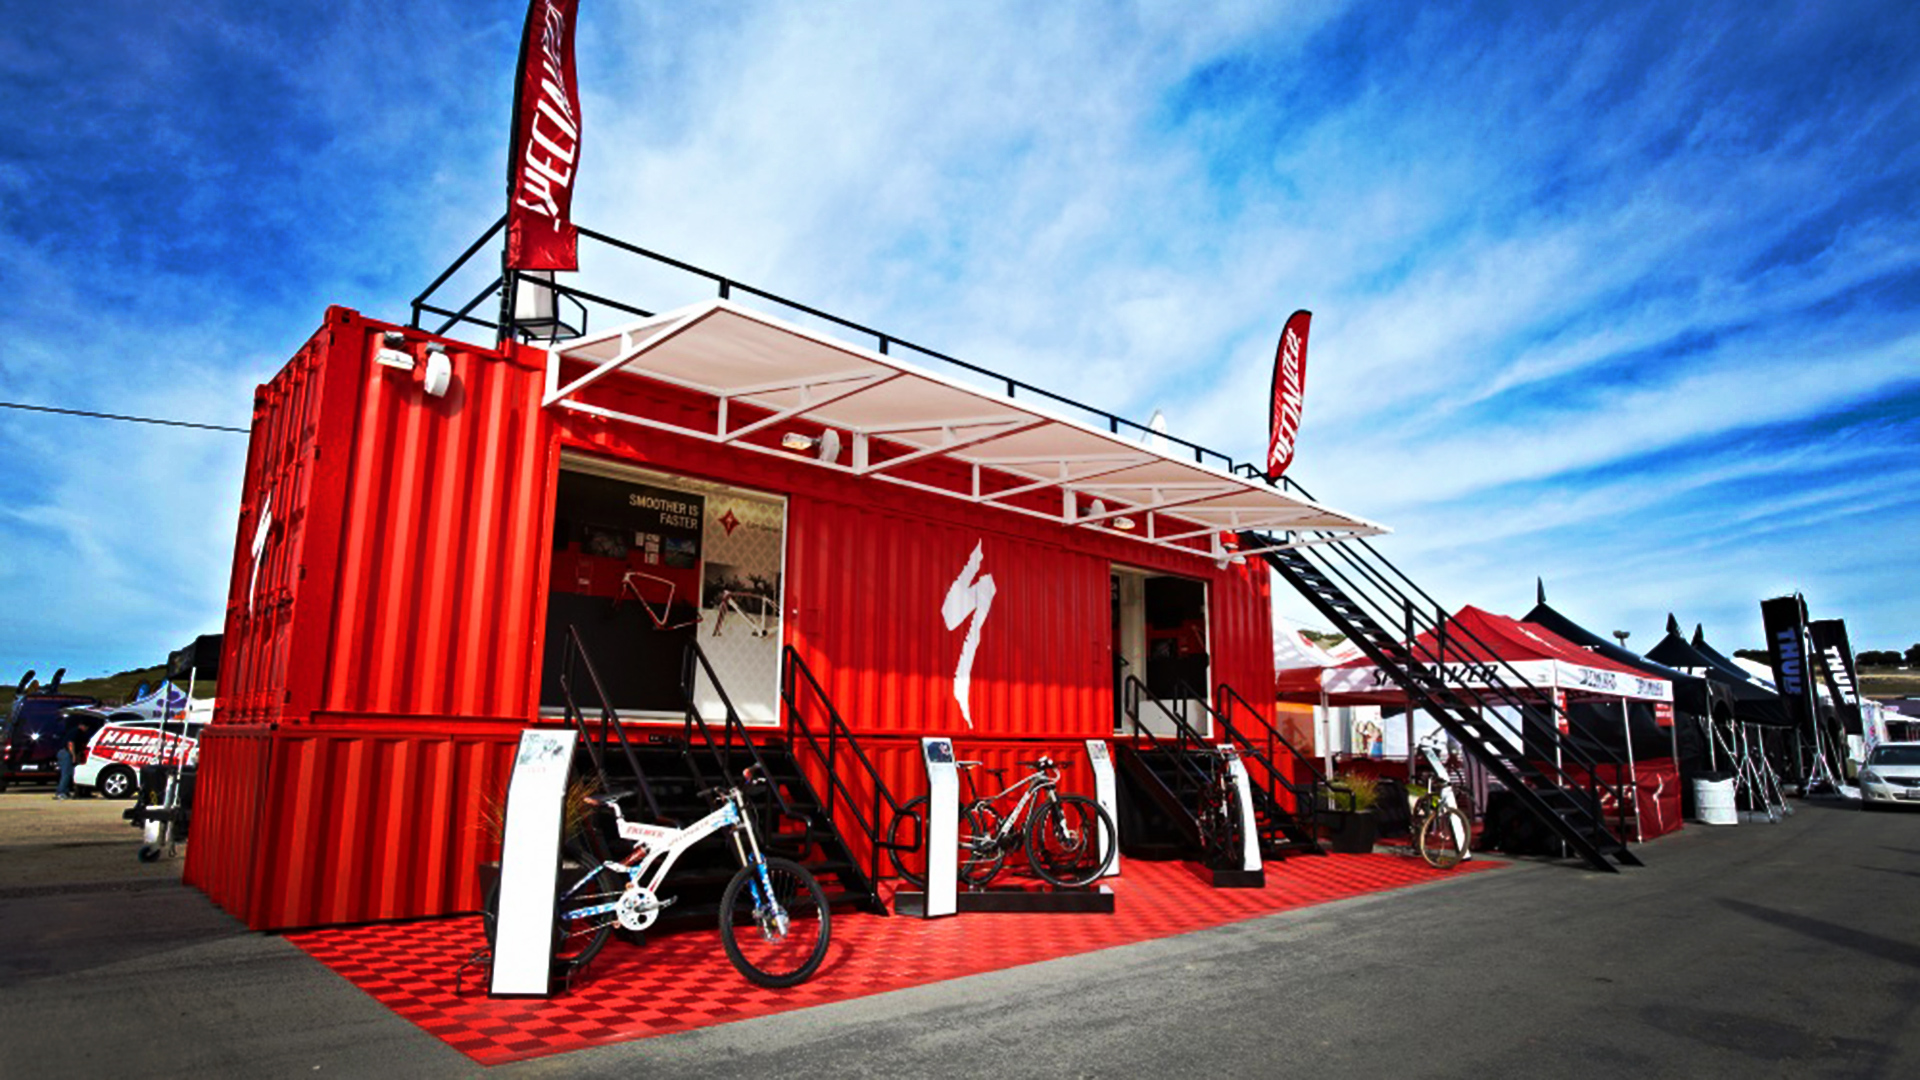 Event container. Контейнер ивент. Контейнер бар. Specialized Container). Bicycle Rental Container.